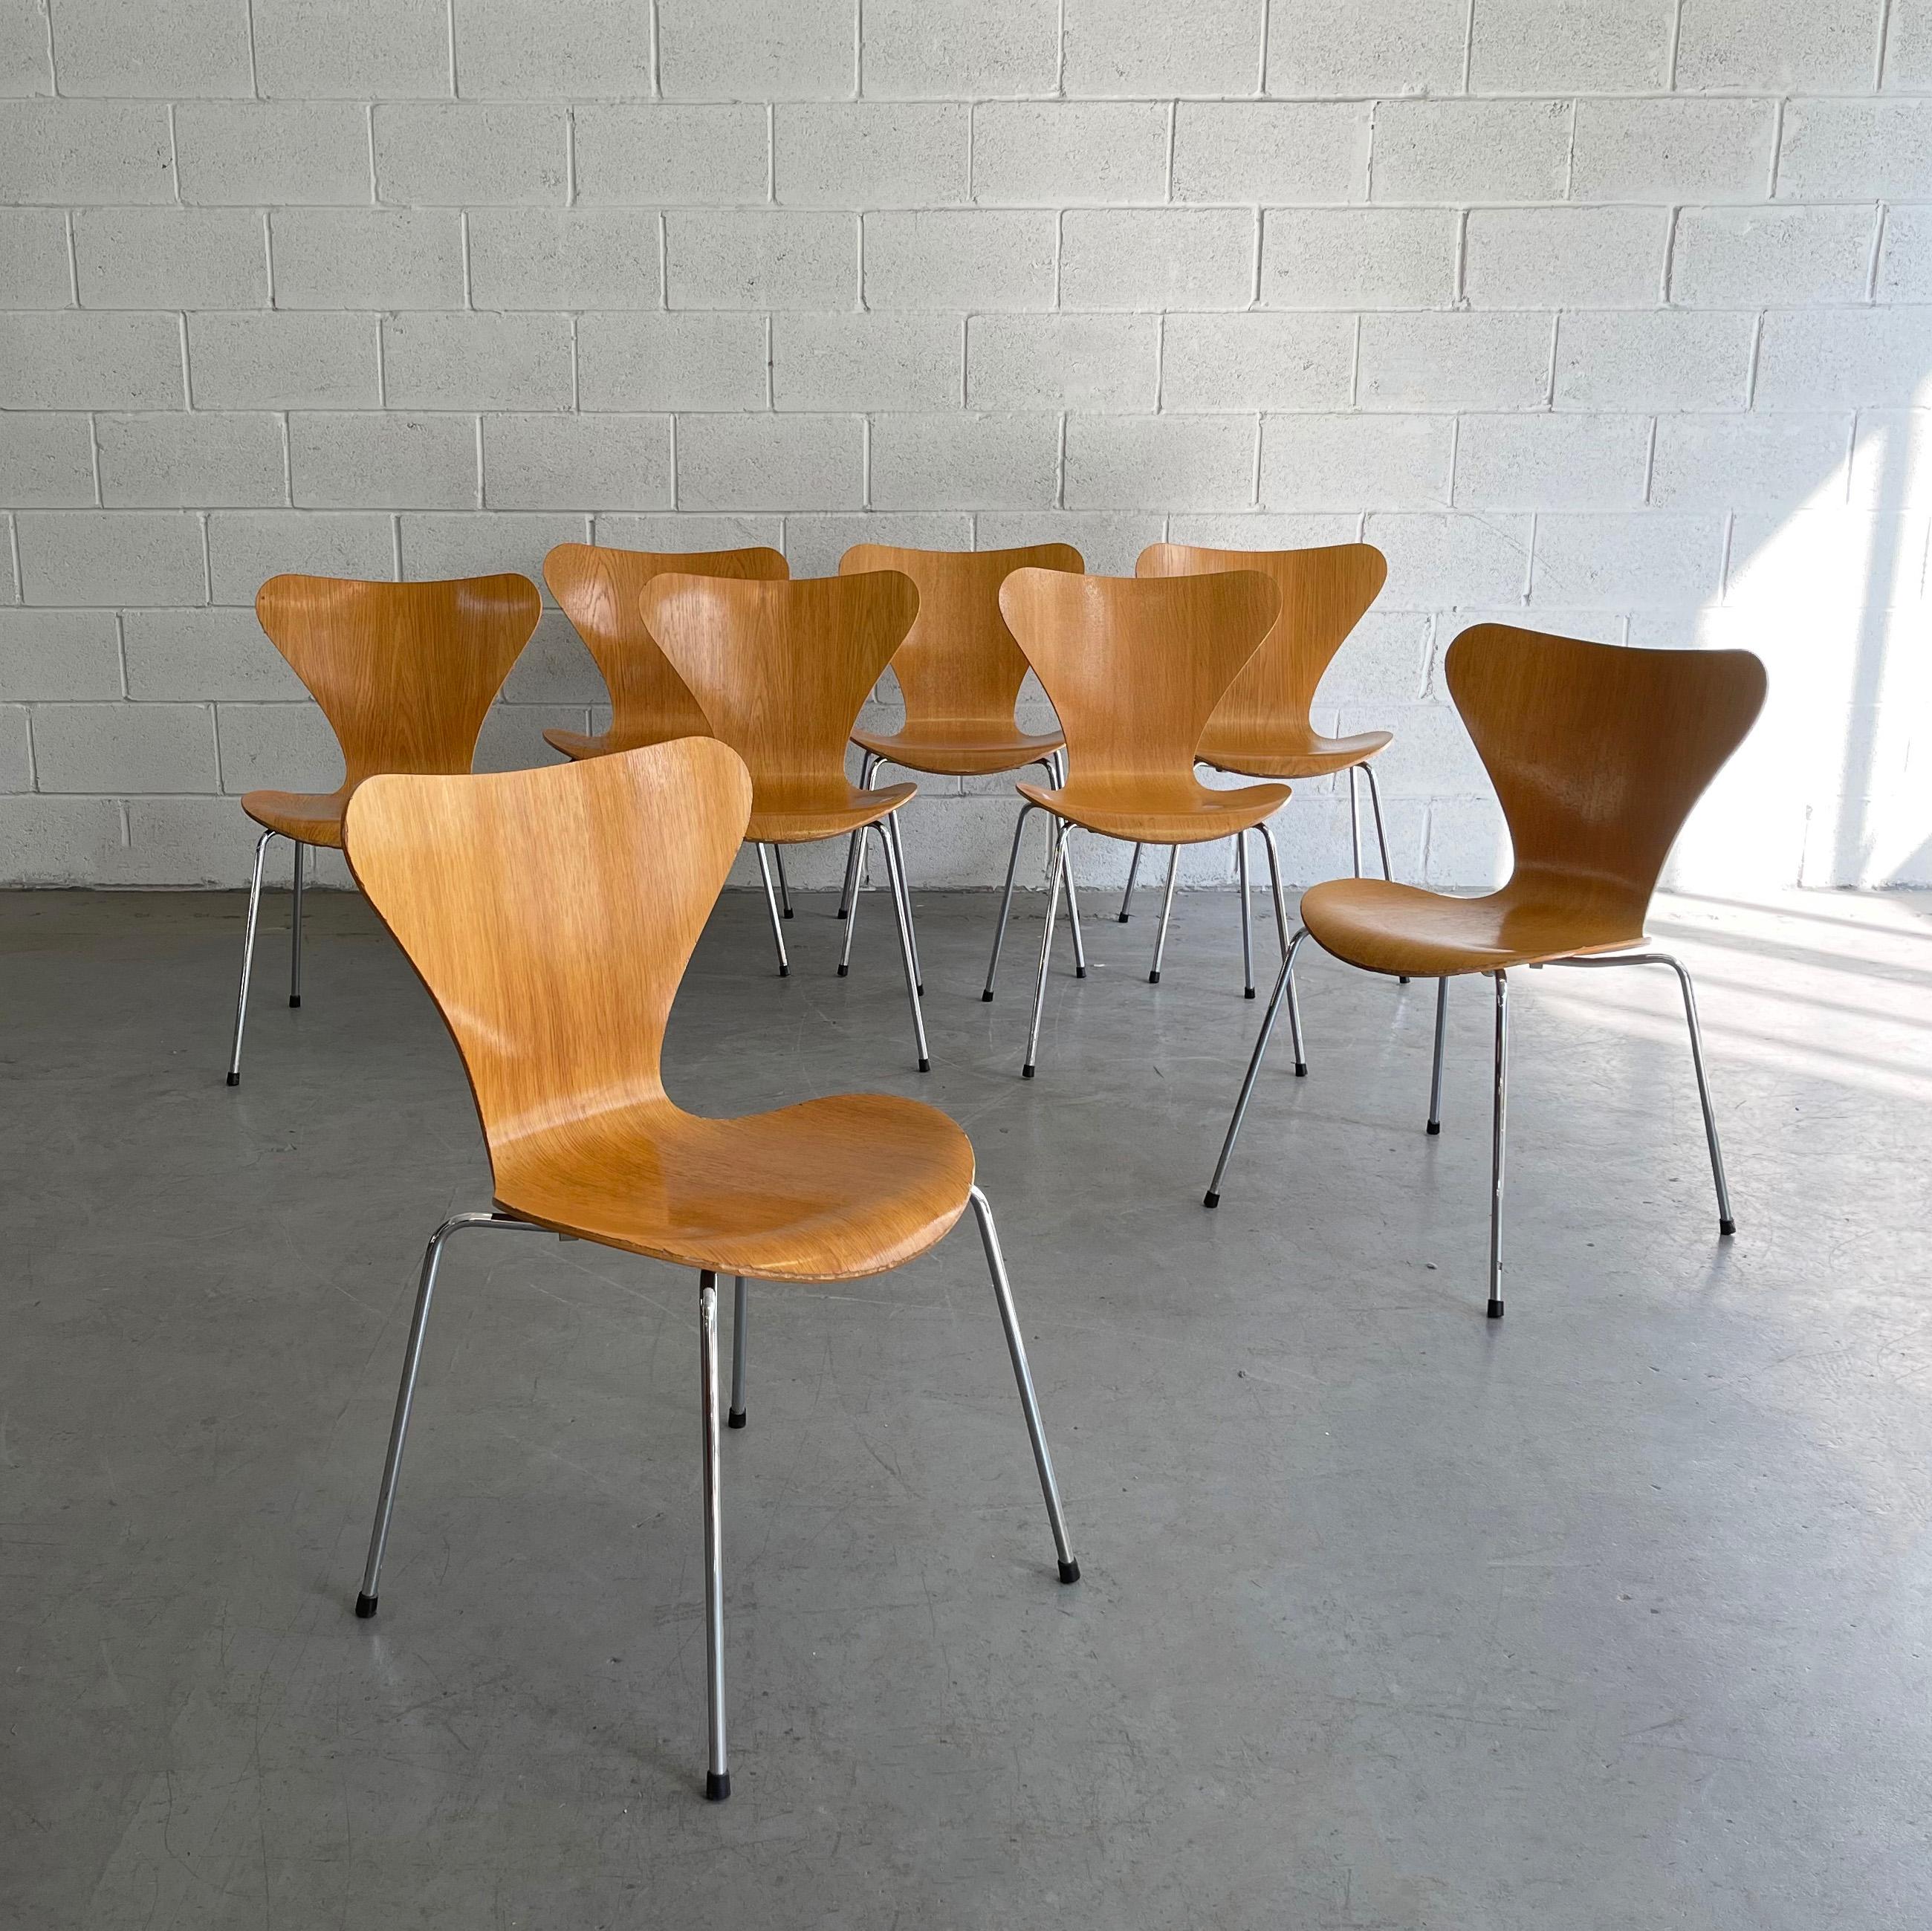 Iconic, Scandinavian Modern, Series 7, model 3107 chairs by Arne Jacobsen for Fritz Hansen. Perfect for dining or office/desk use. 6 stackable chairs are available, 2 ash and 4 maple. They are sold individually. The ash chairs are shown in these